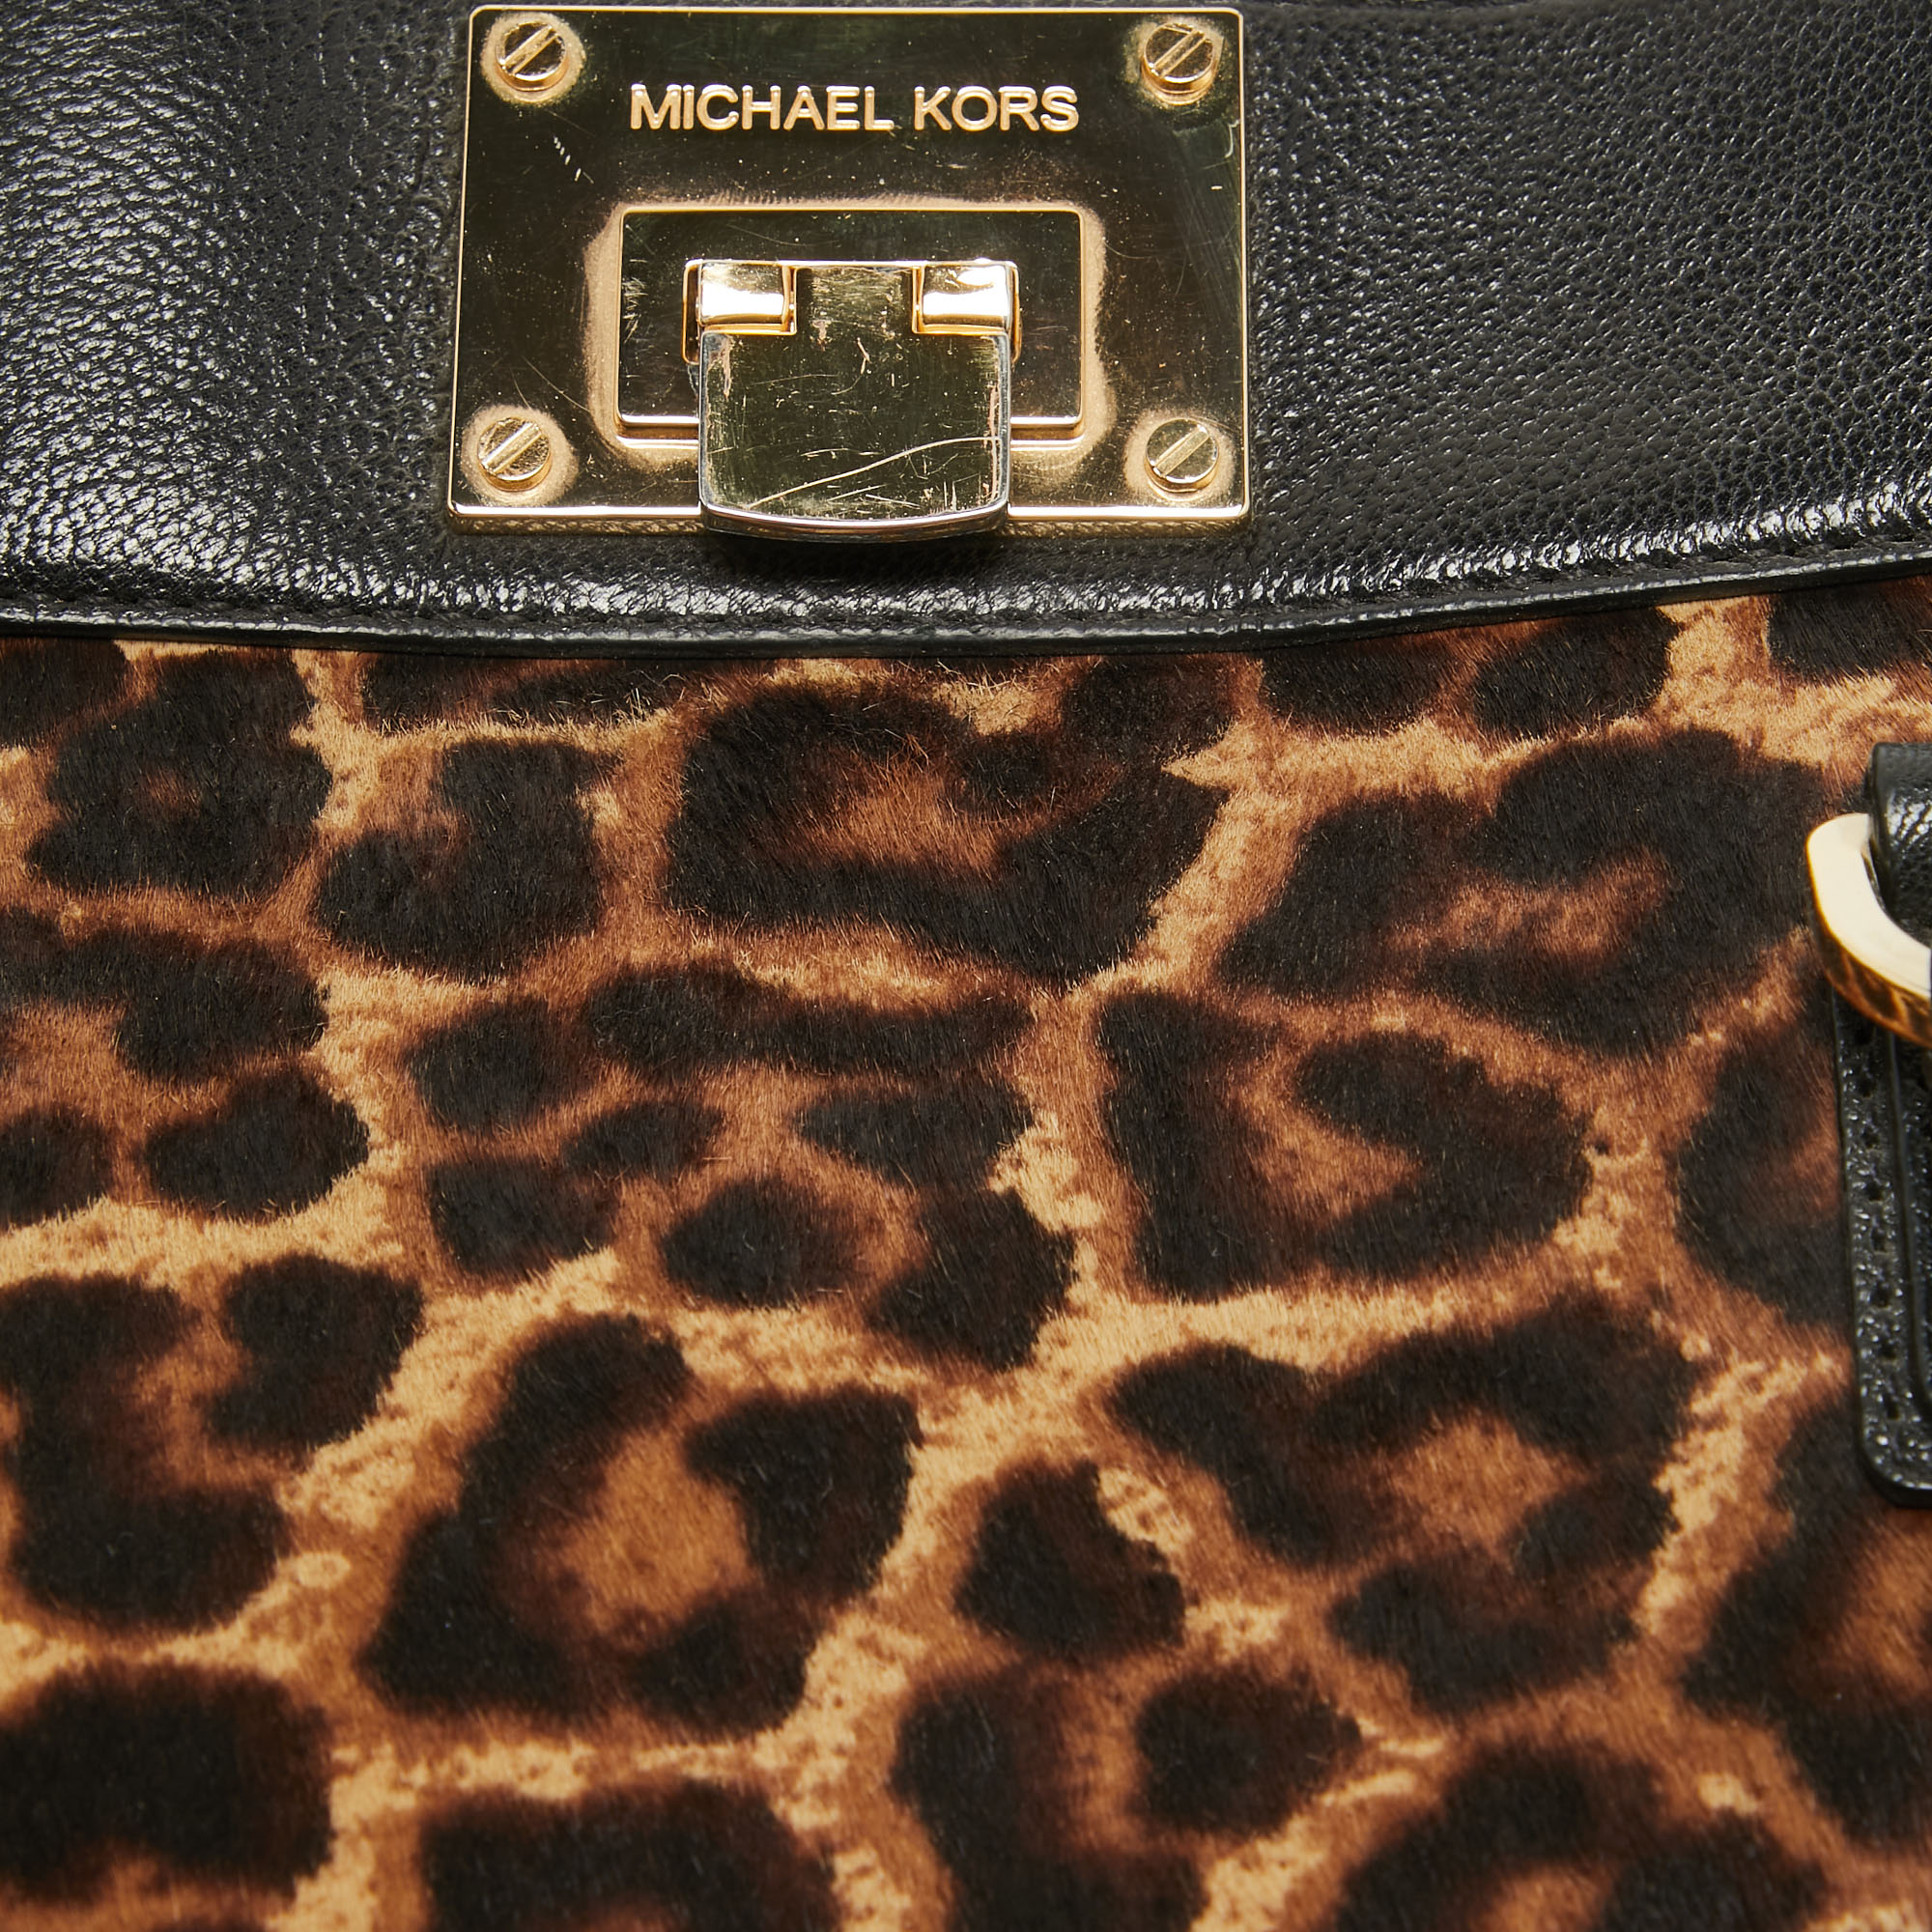 MICHAEL Michael Kors Black/Brown Leopard Print Calfhair And Leather Astrid Tote